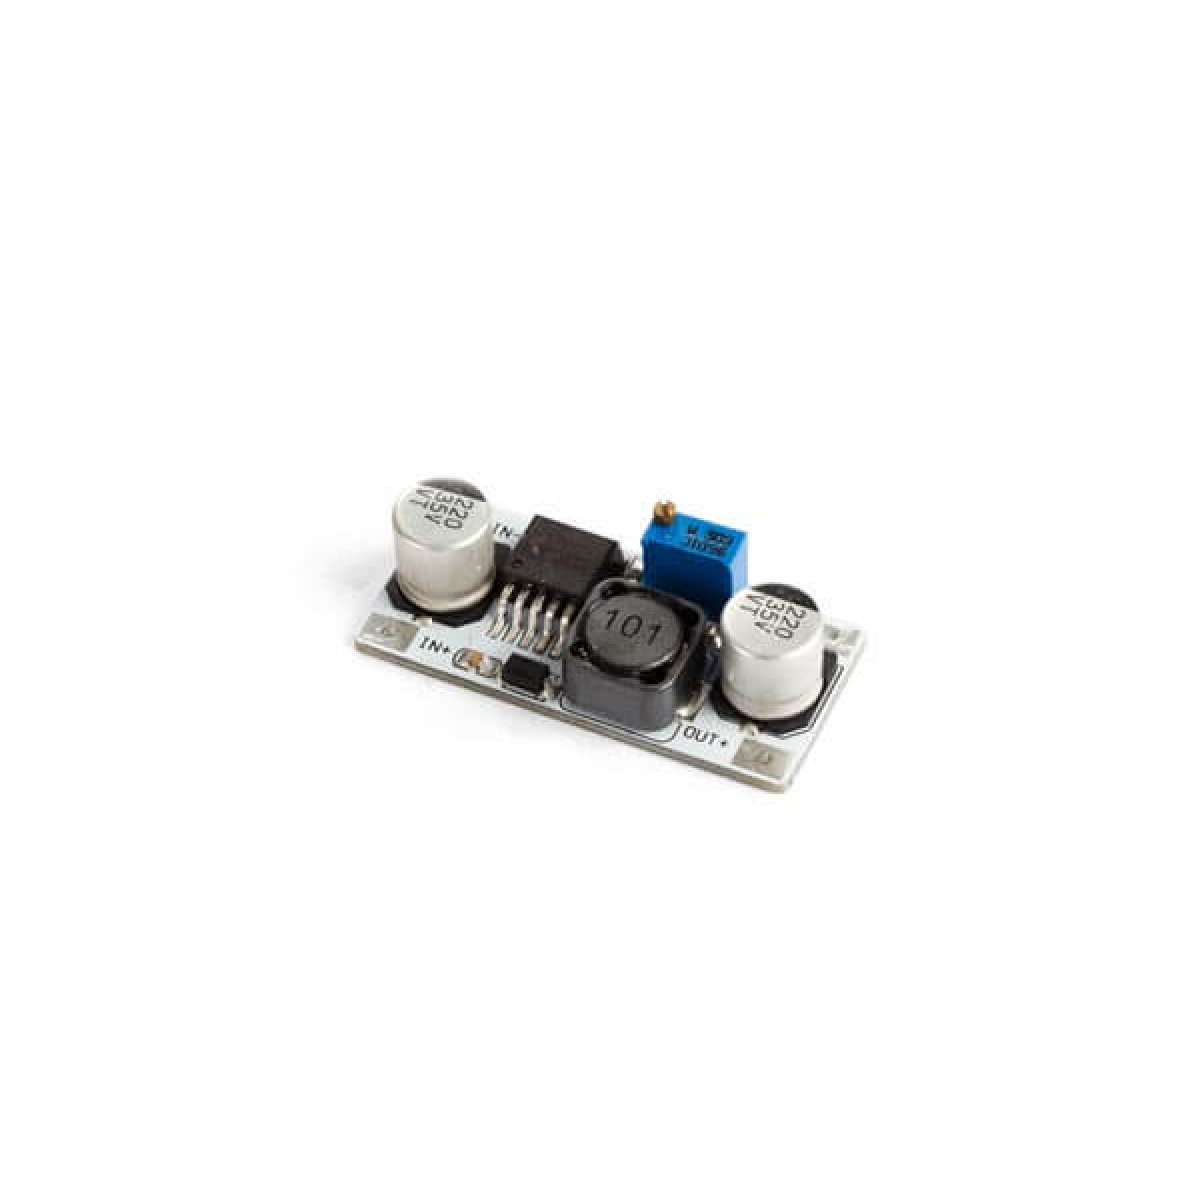 MODULO STEP DOWN DC-DC TENSION REGULABLE LM2596S